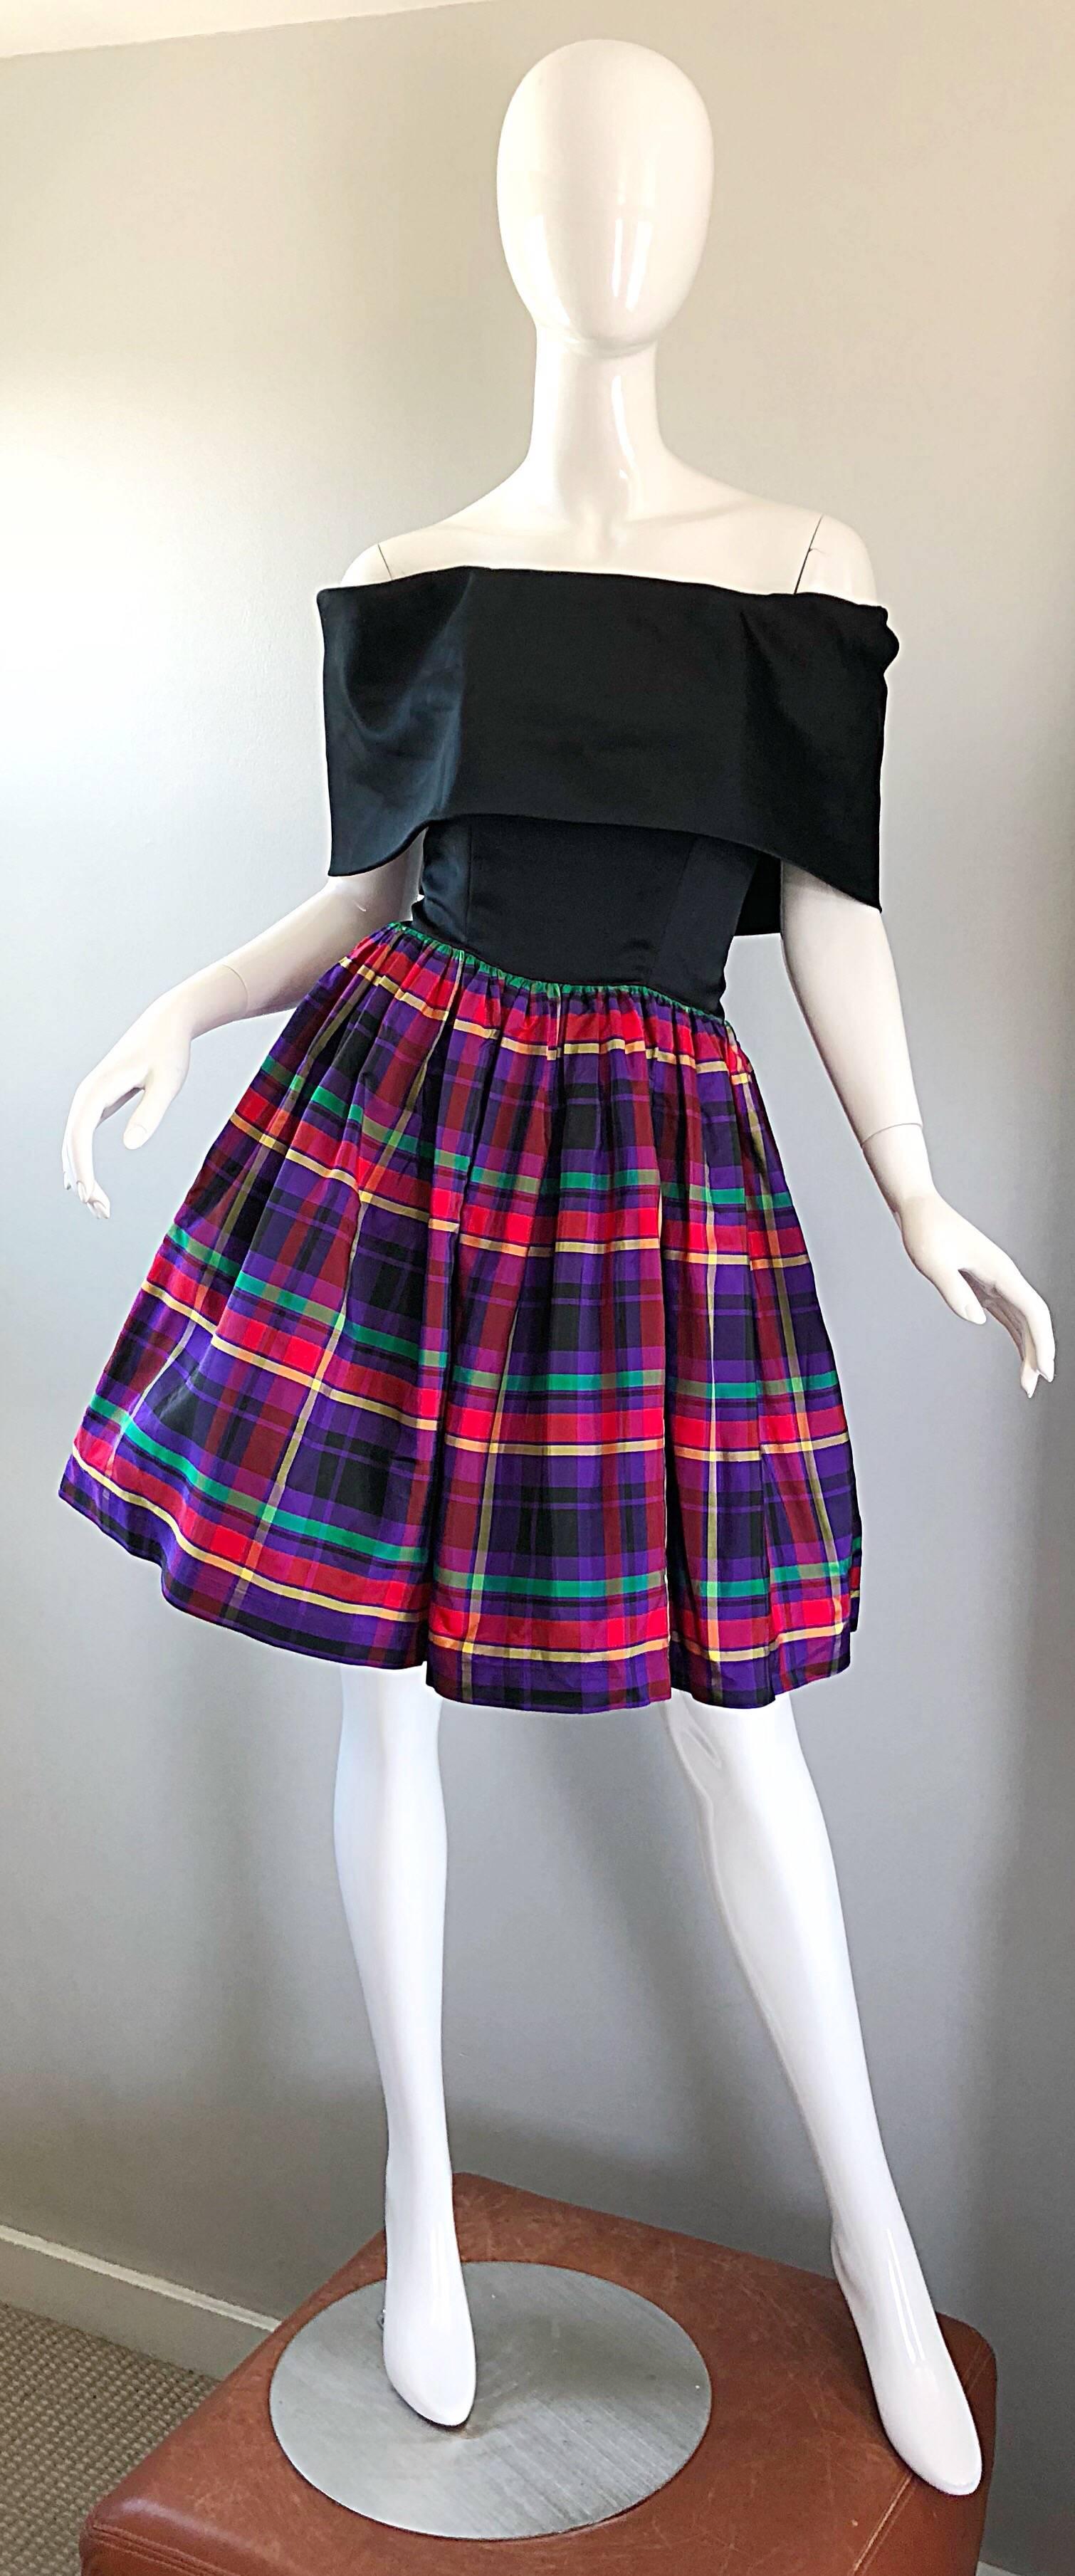 Elegant and flirty HUEY WALTZER for NEIMAN MARCUS black and plaid off-the-shoulder fit n' flare cocktail dress! Features a black satin Avant Garde tailored off-the shoulder fitted bodice. Flattering attached full taffeta skirt has a plaid print in